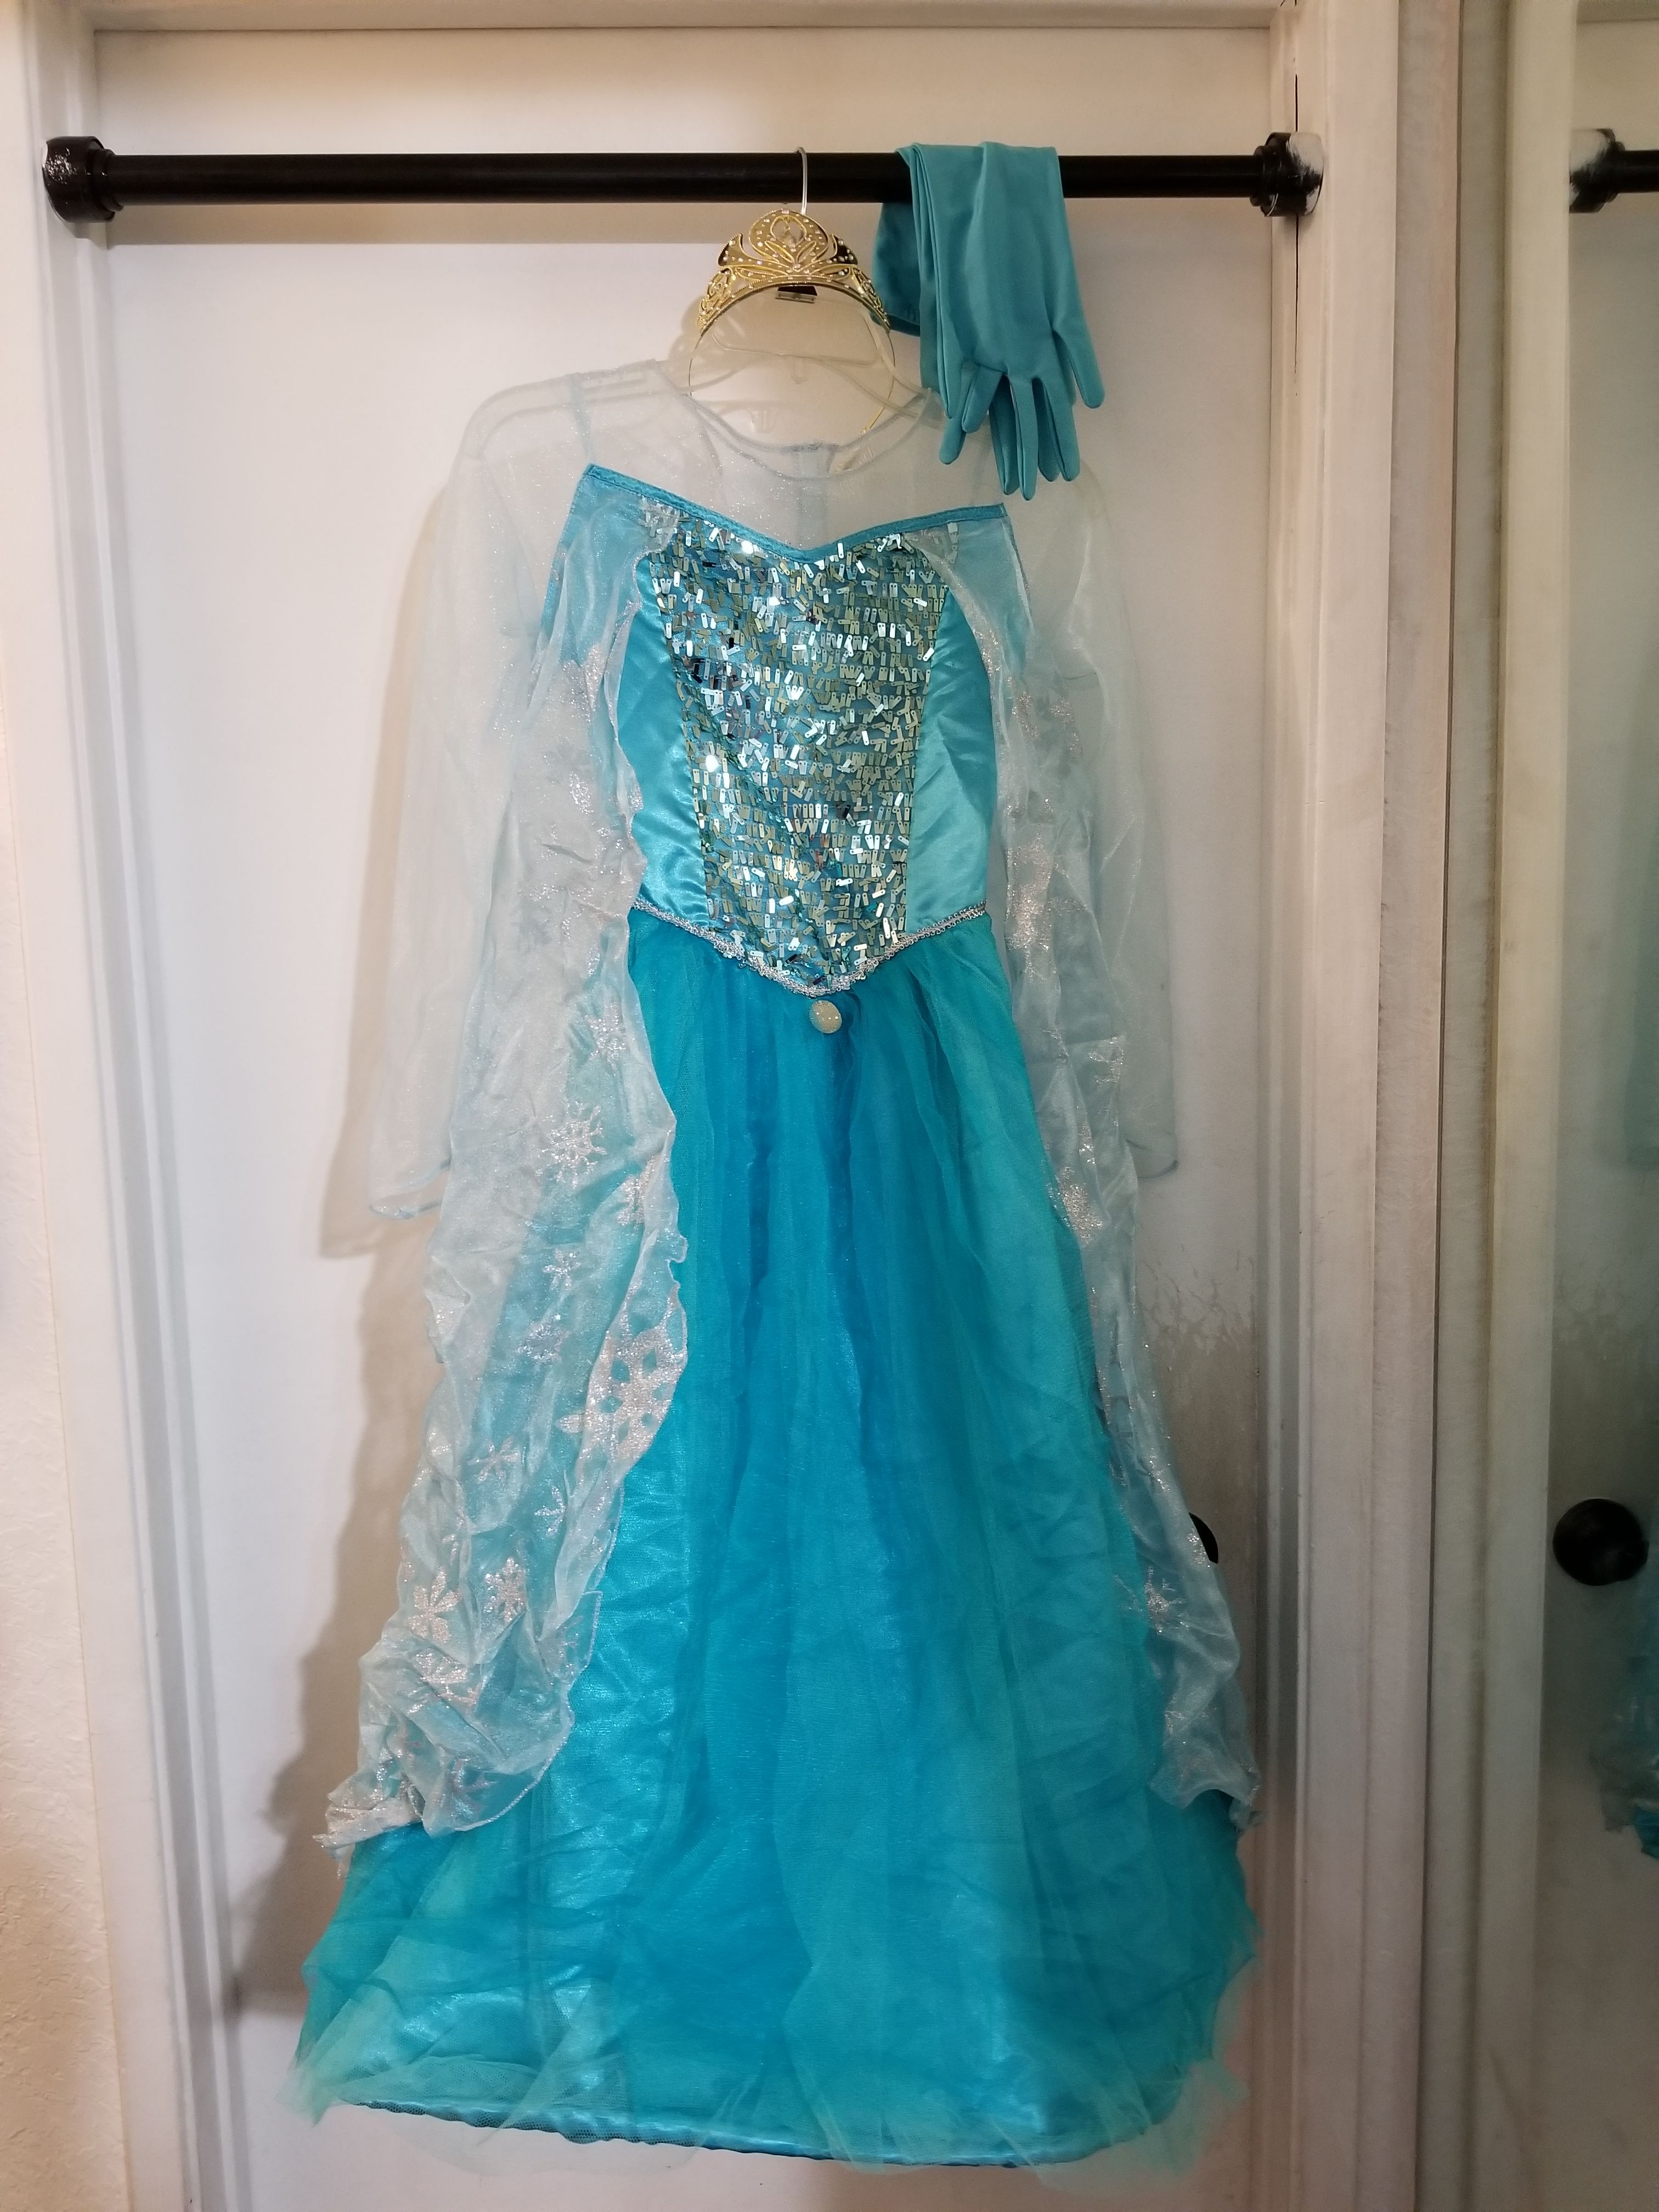 Disney Elsa Dress 10-12 with gloves and crown